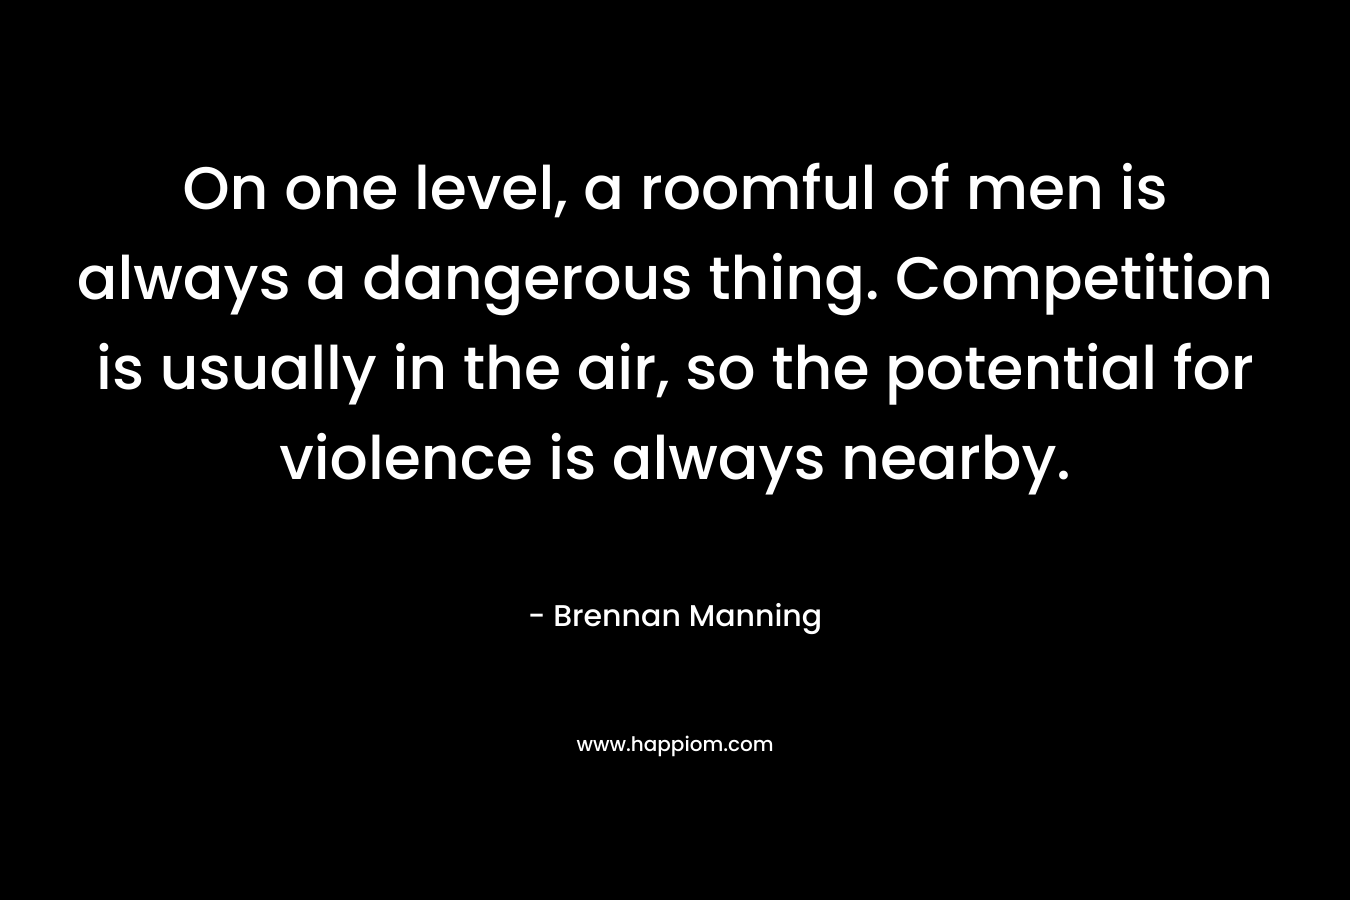 On one level, a roomful of men is always a dangerous thing. Competition is usually in the air, so the potential for violence is always nearby.